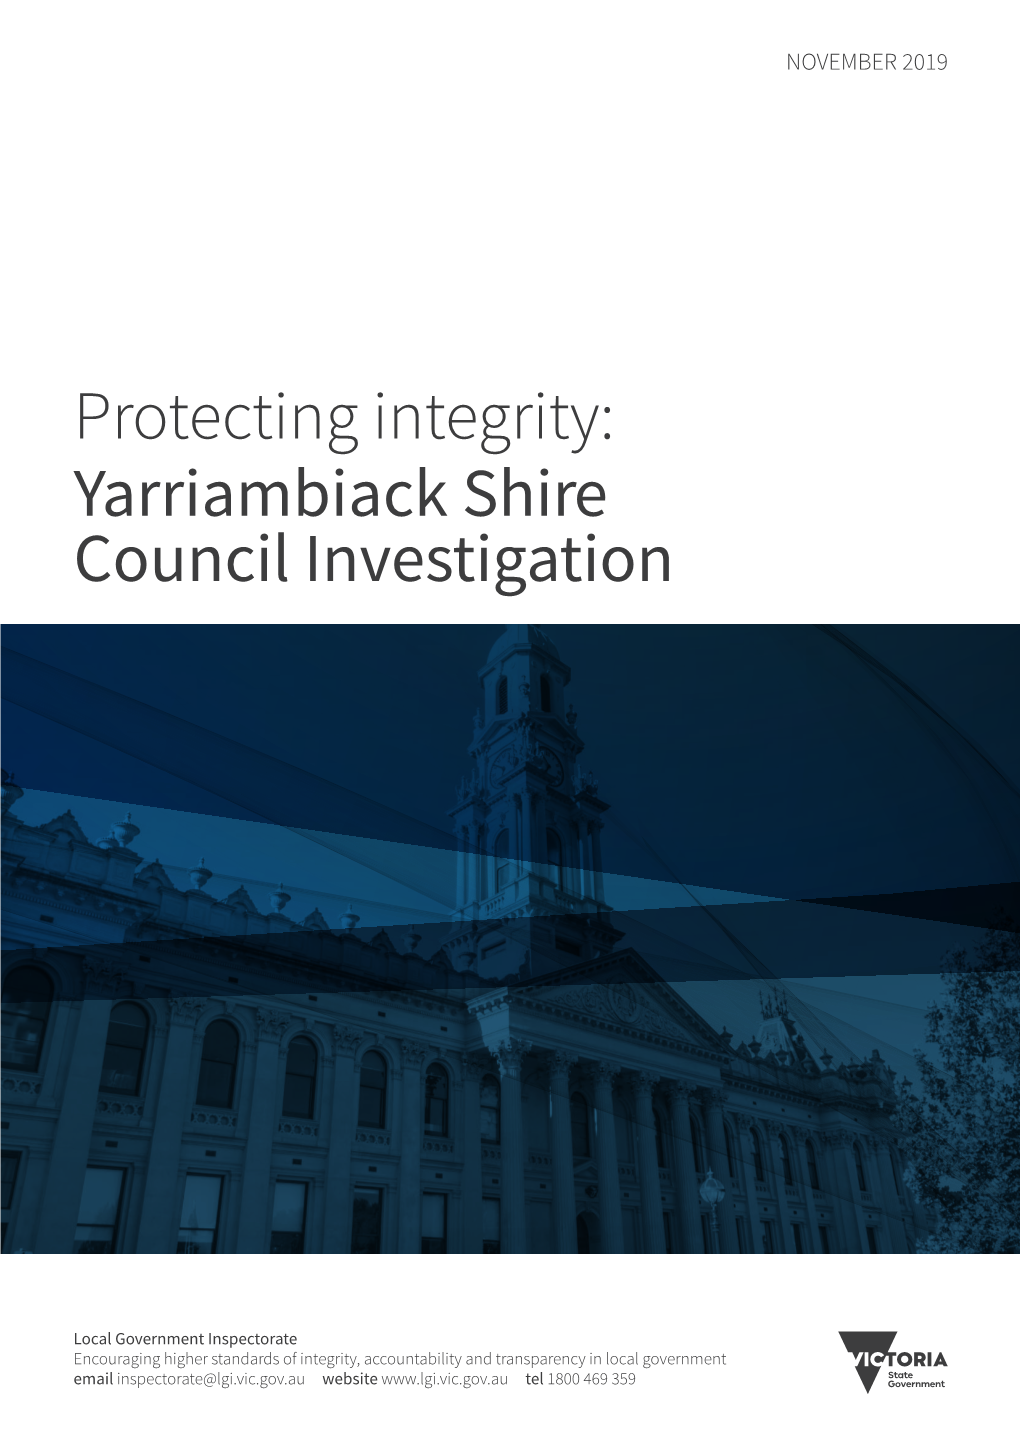 Yarriambiack Shire Council Investigation Protecting Integrity